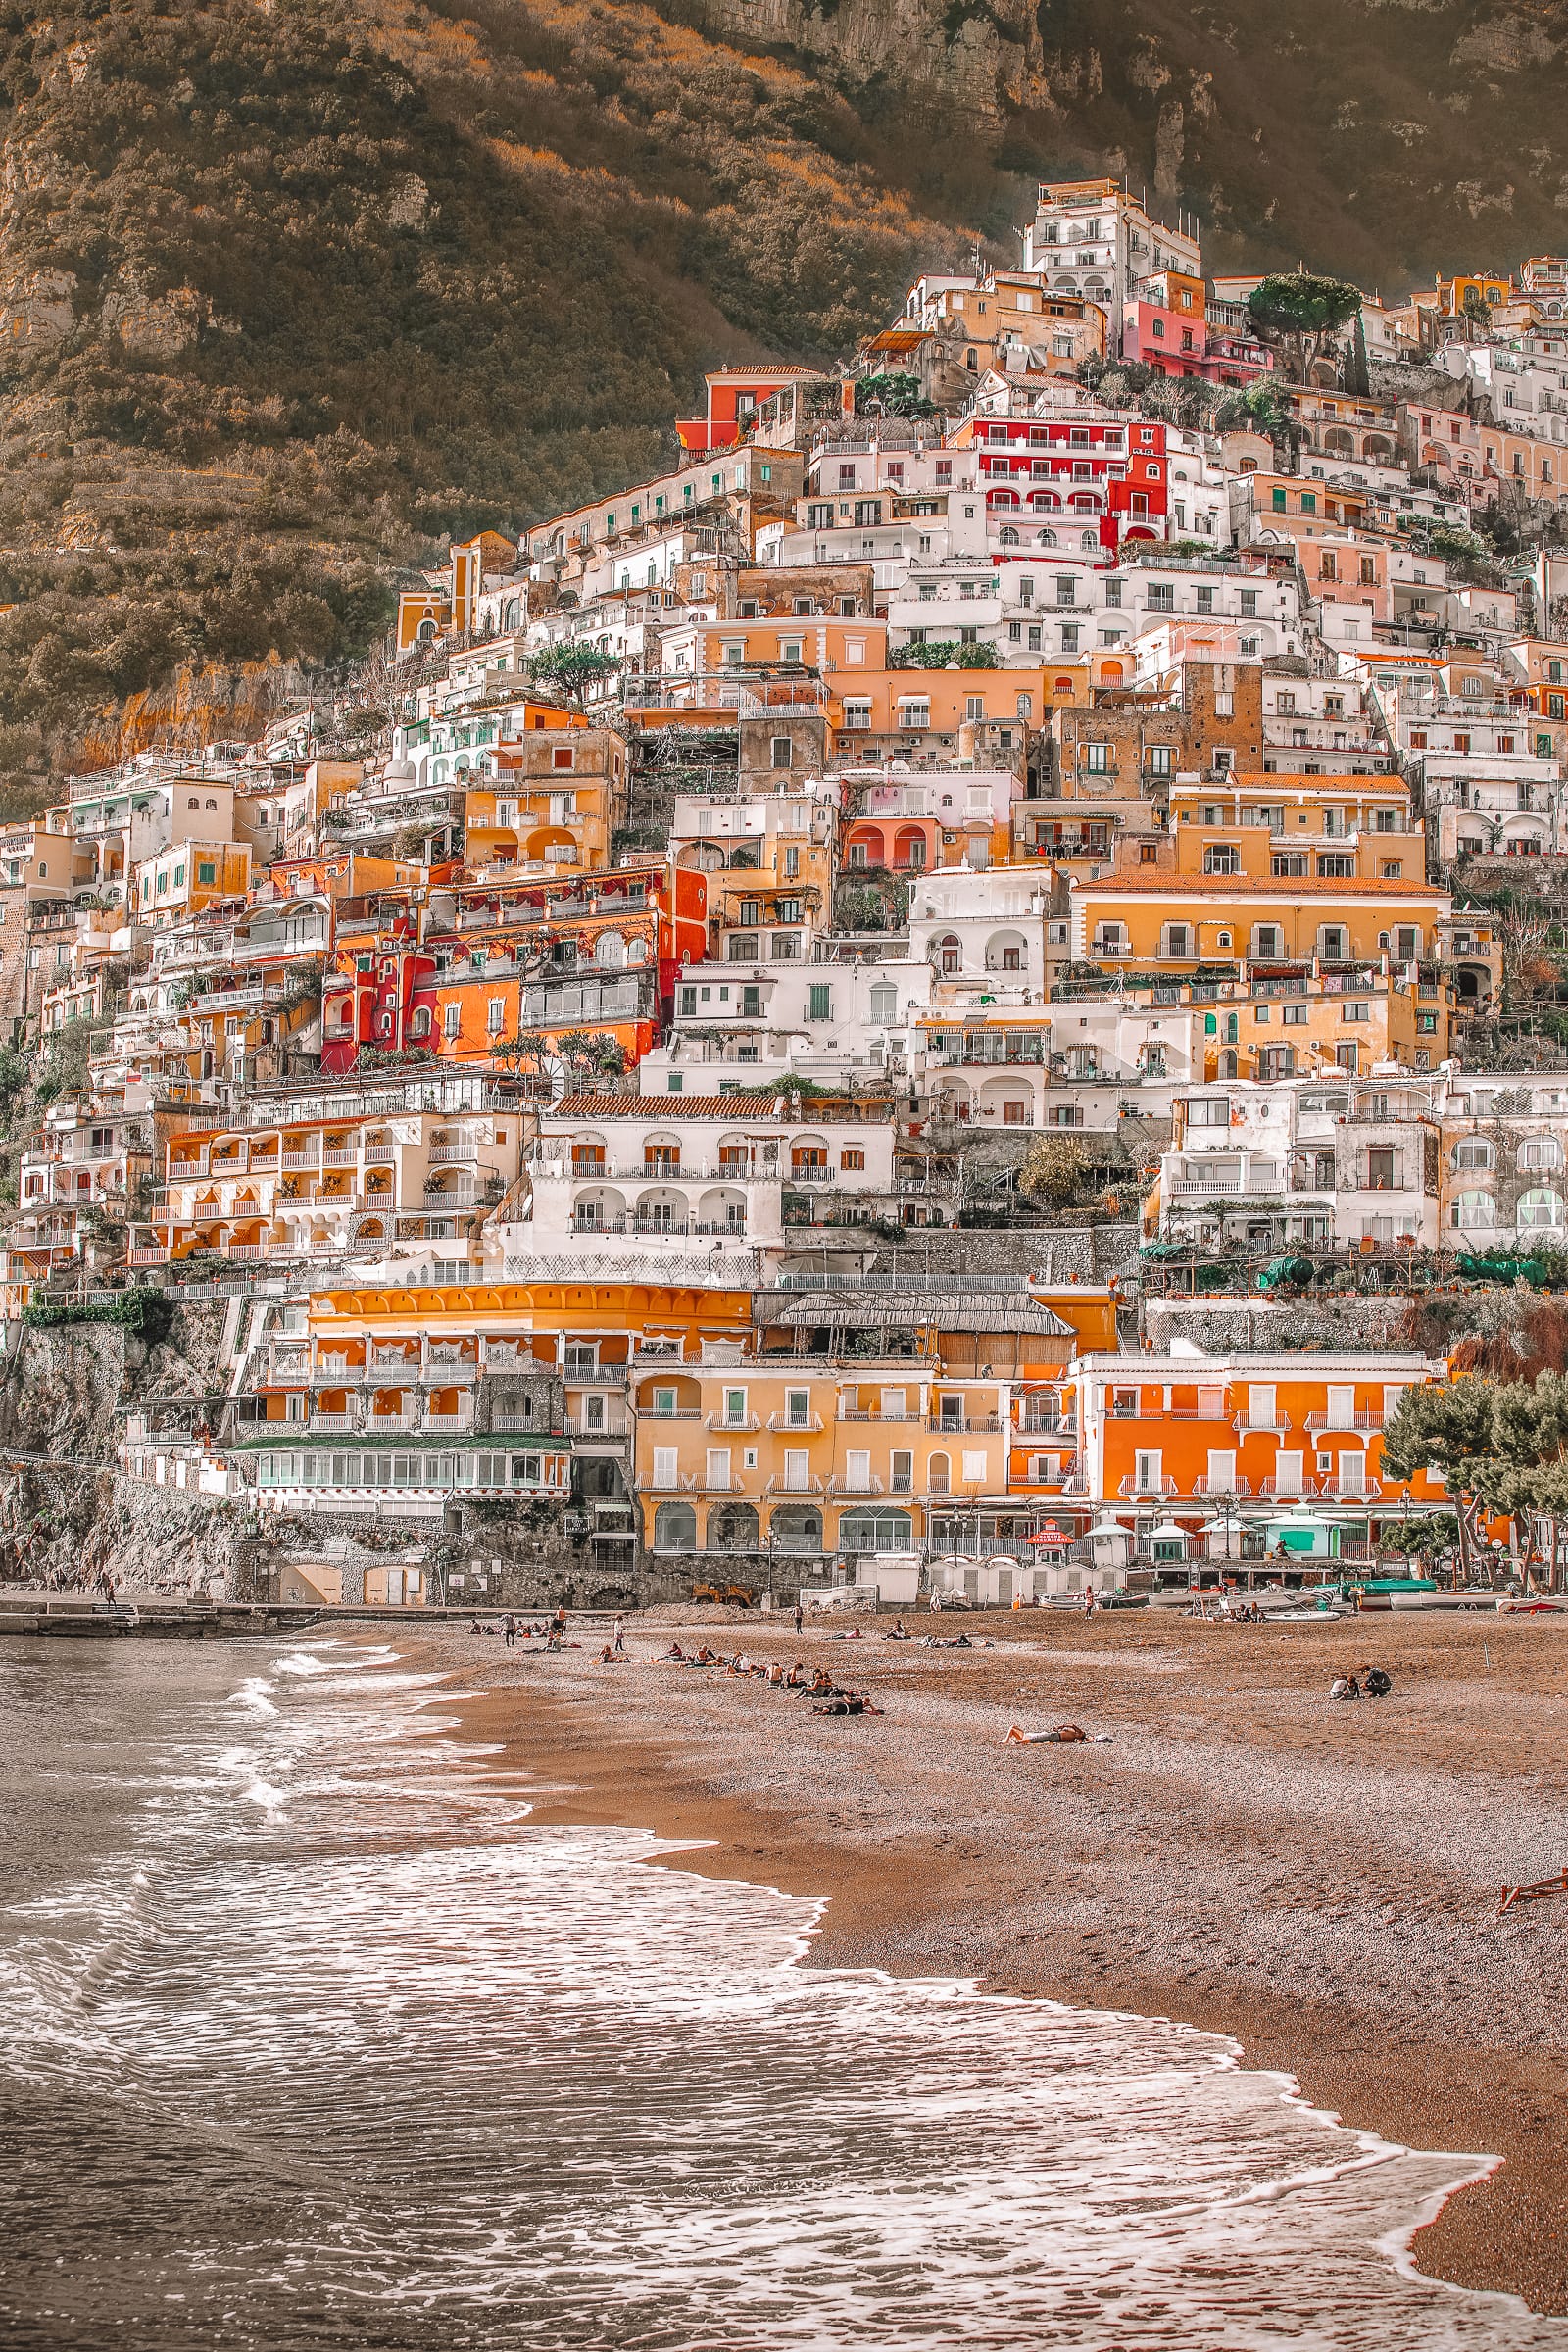 7 Reasons To Visit Positano, Italy - Hand Luggage Only - Travel, Food &  Photography Blog